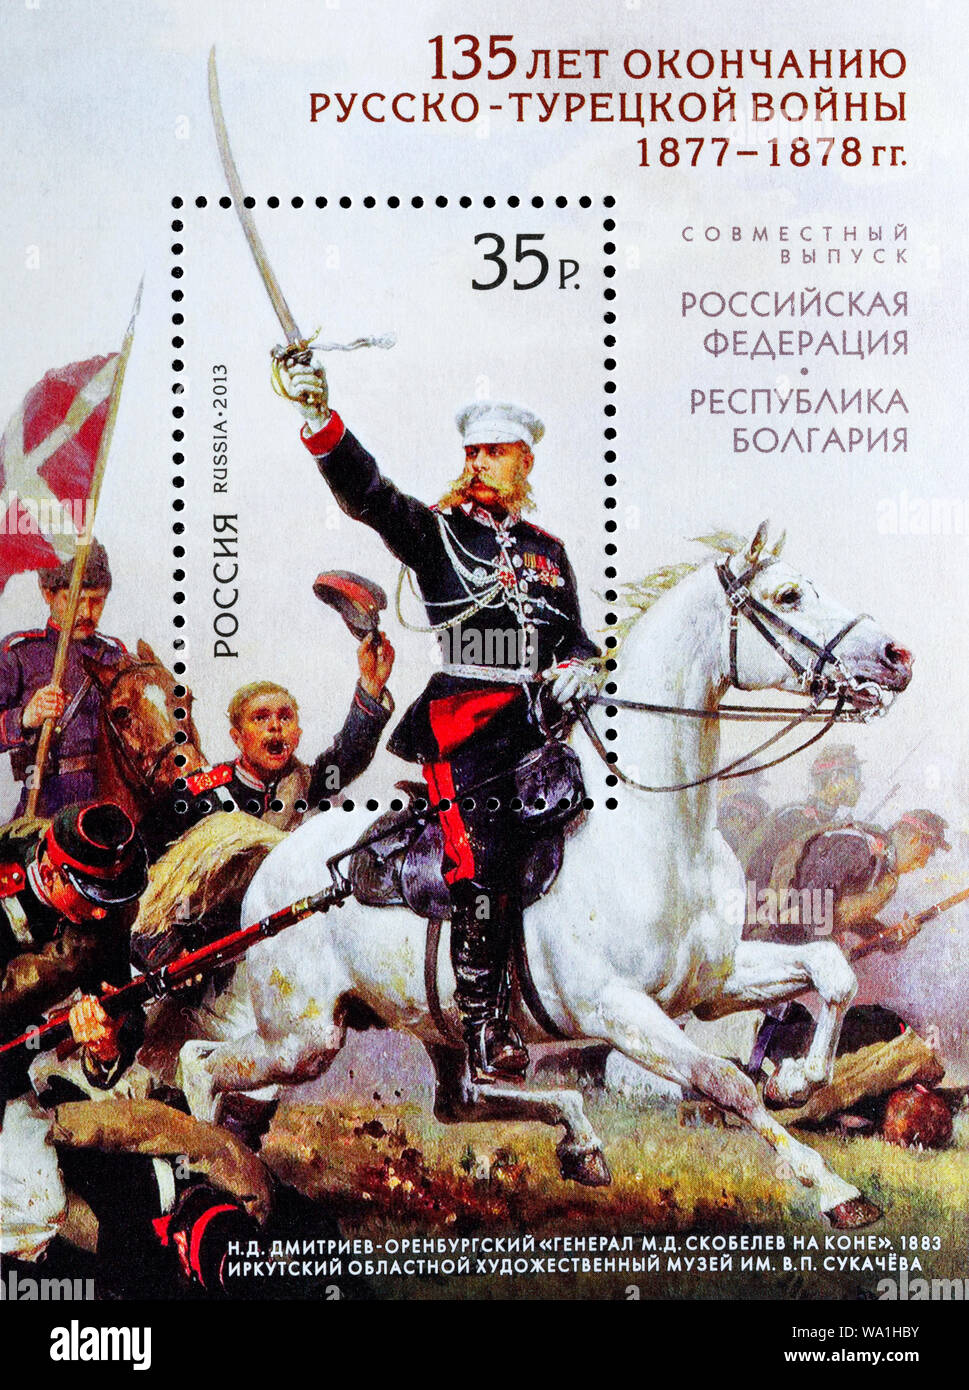 135th Anniversary of end of the Russo-Turkish War of 1877-1878, Mikhail Skobelev (1843-1882), Russian general, postage stamp, Russia, USSR, 2013 Stock Photo